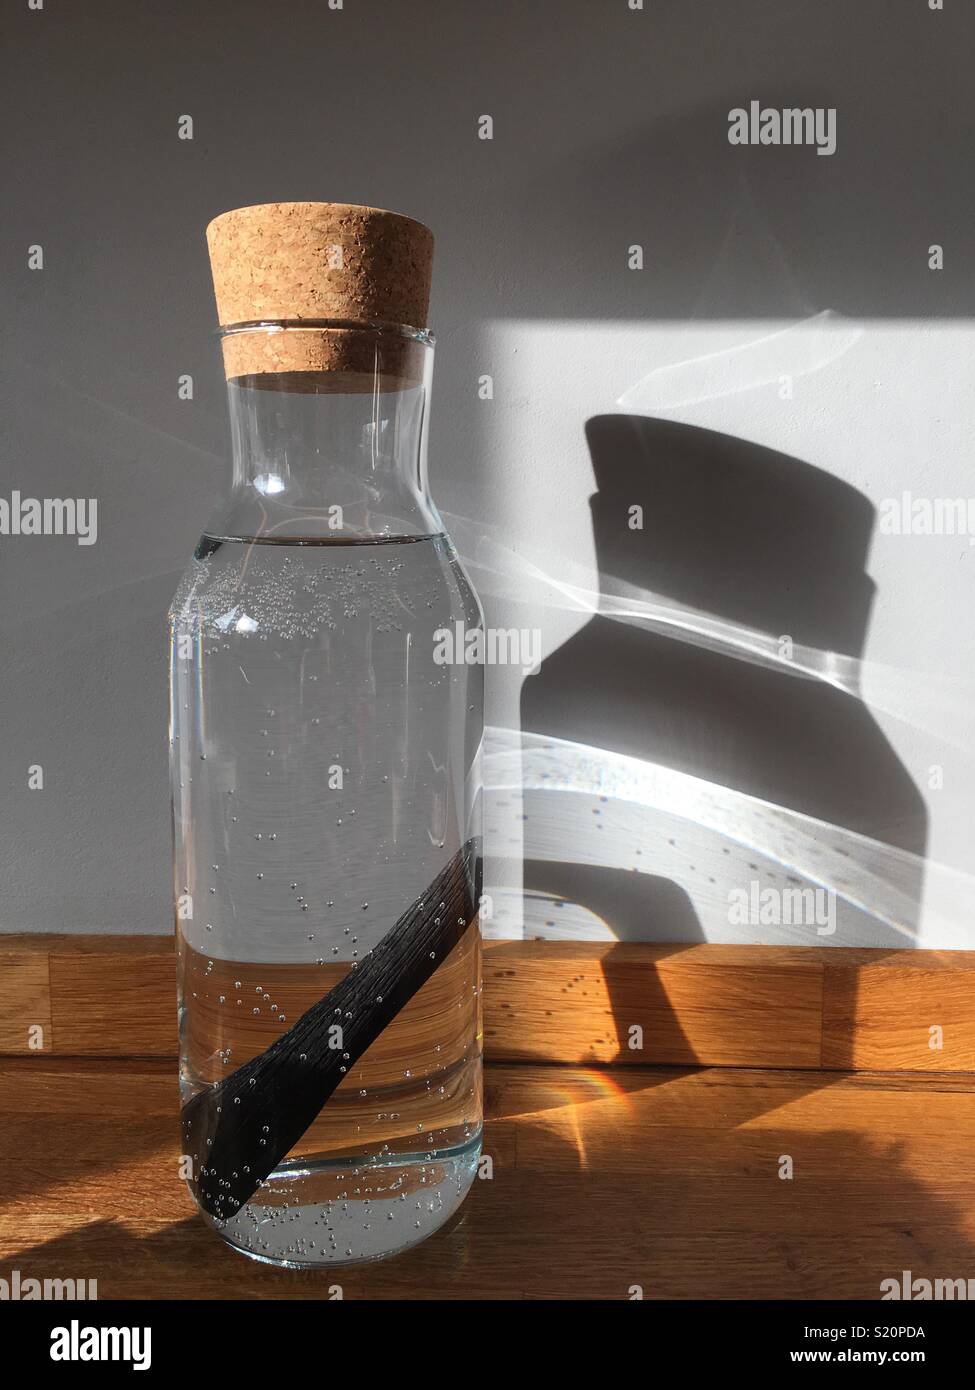 Simple glass water jug with, using activated charcoal stick to purify water, sun shining through making interesting patterns on the wall. Stock Photo